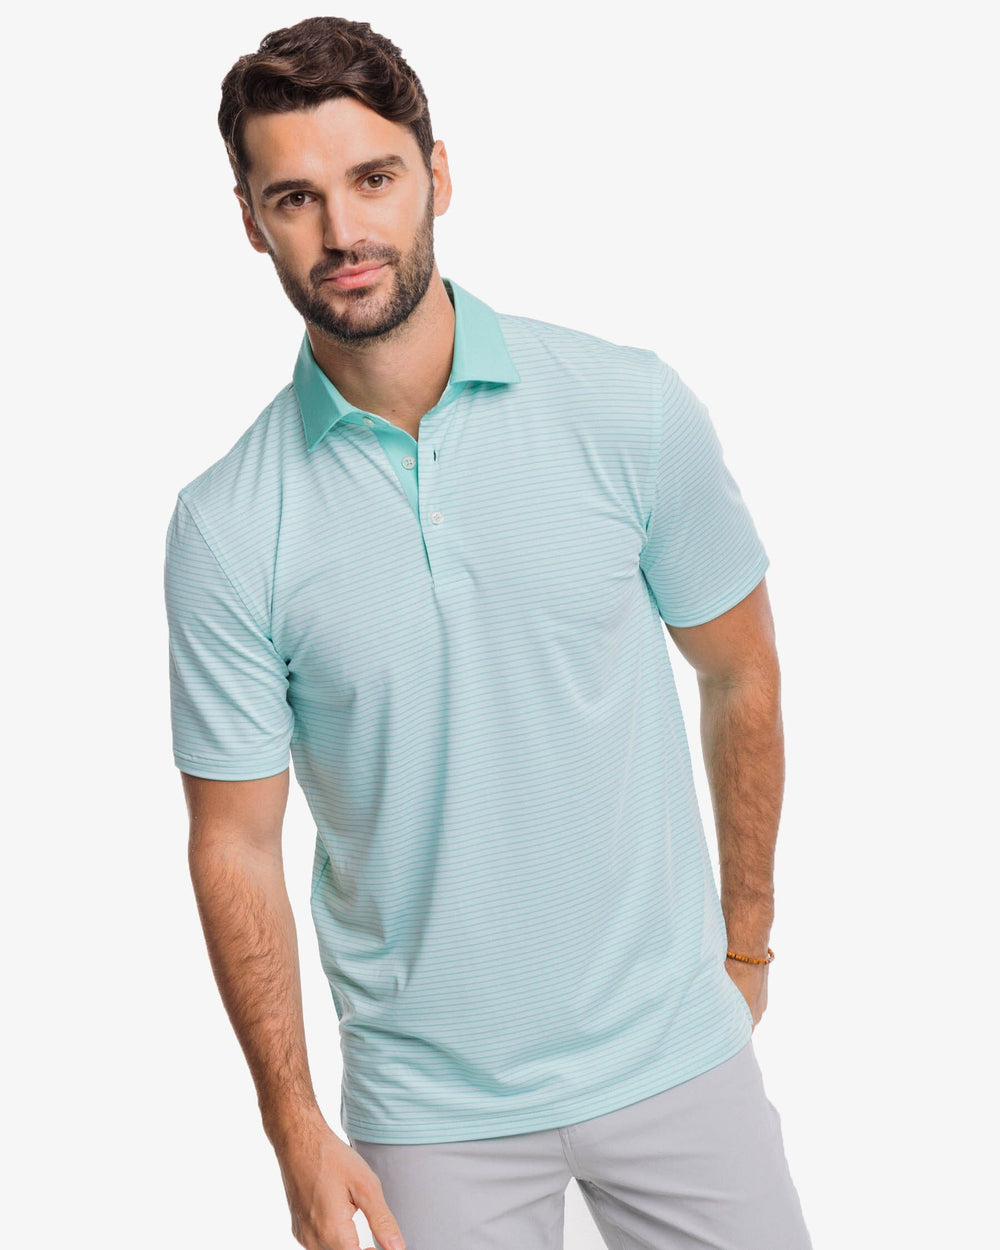 The front view of the Southern Tide Driver Bowee Stripe Performance Polo Shirt by Southern Tide - Baltic Teal